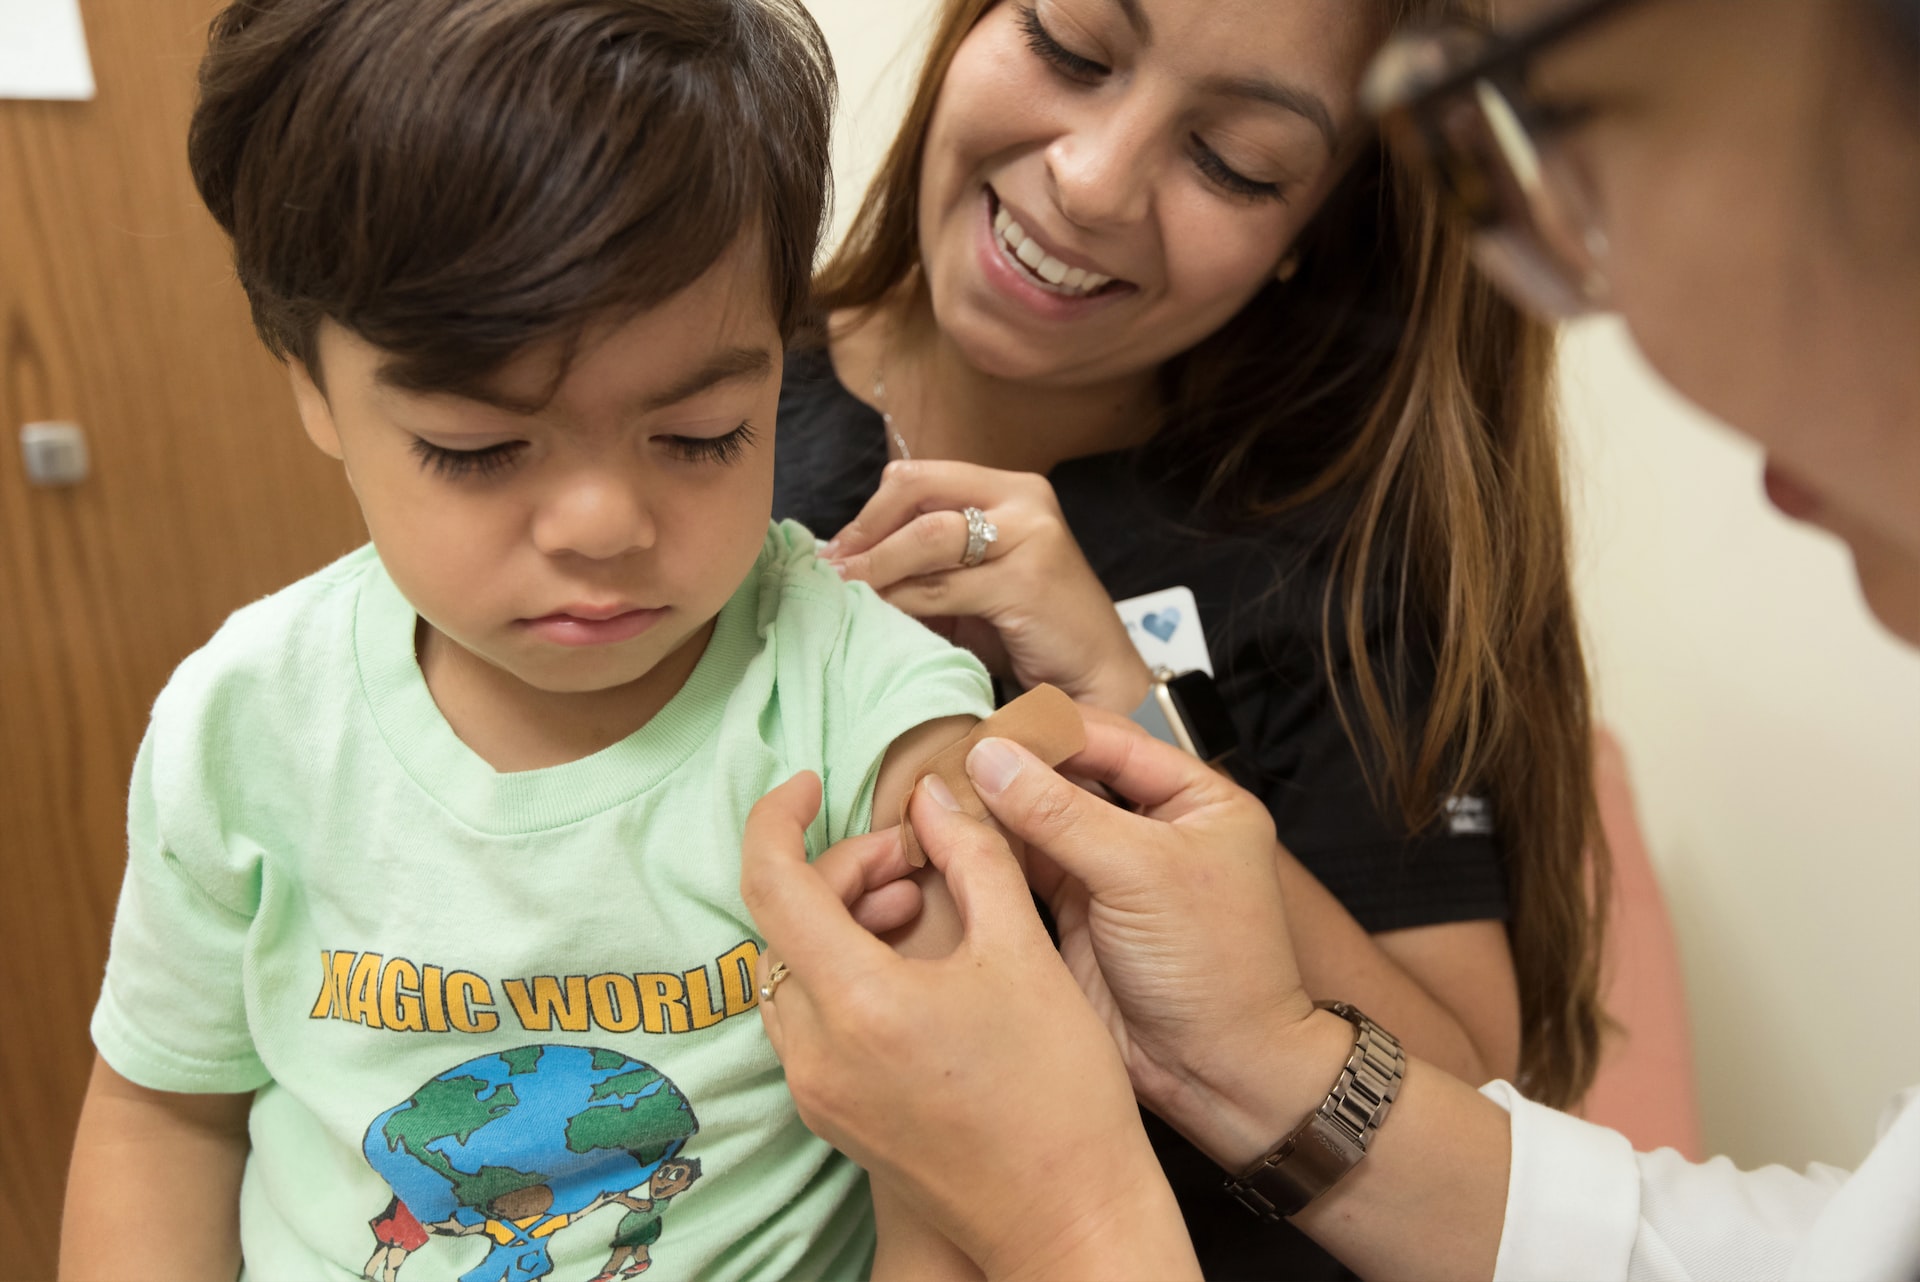 A child getting a vaccine in a doctor's office